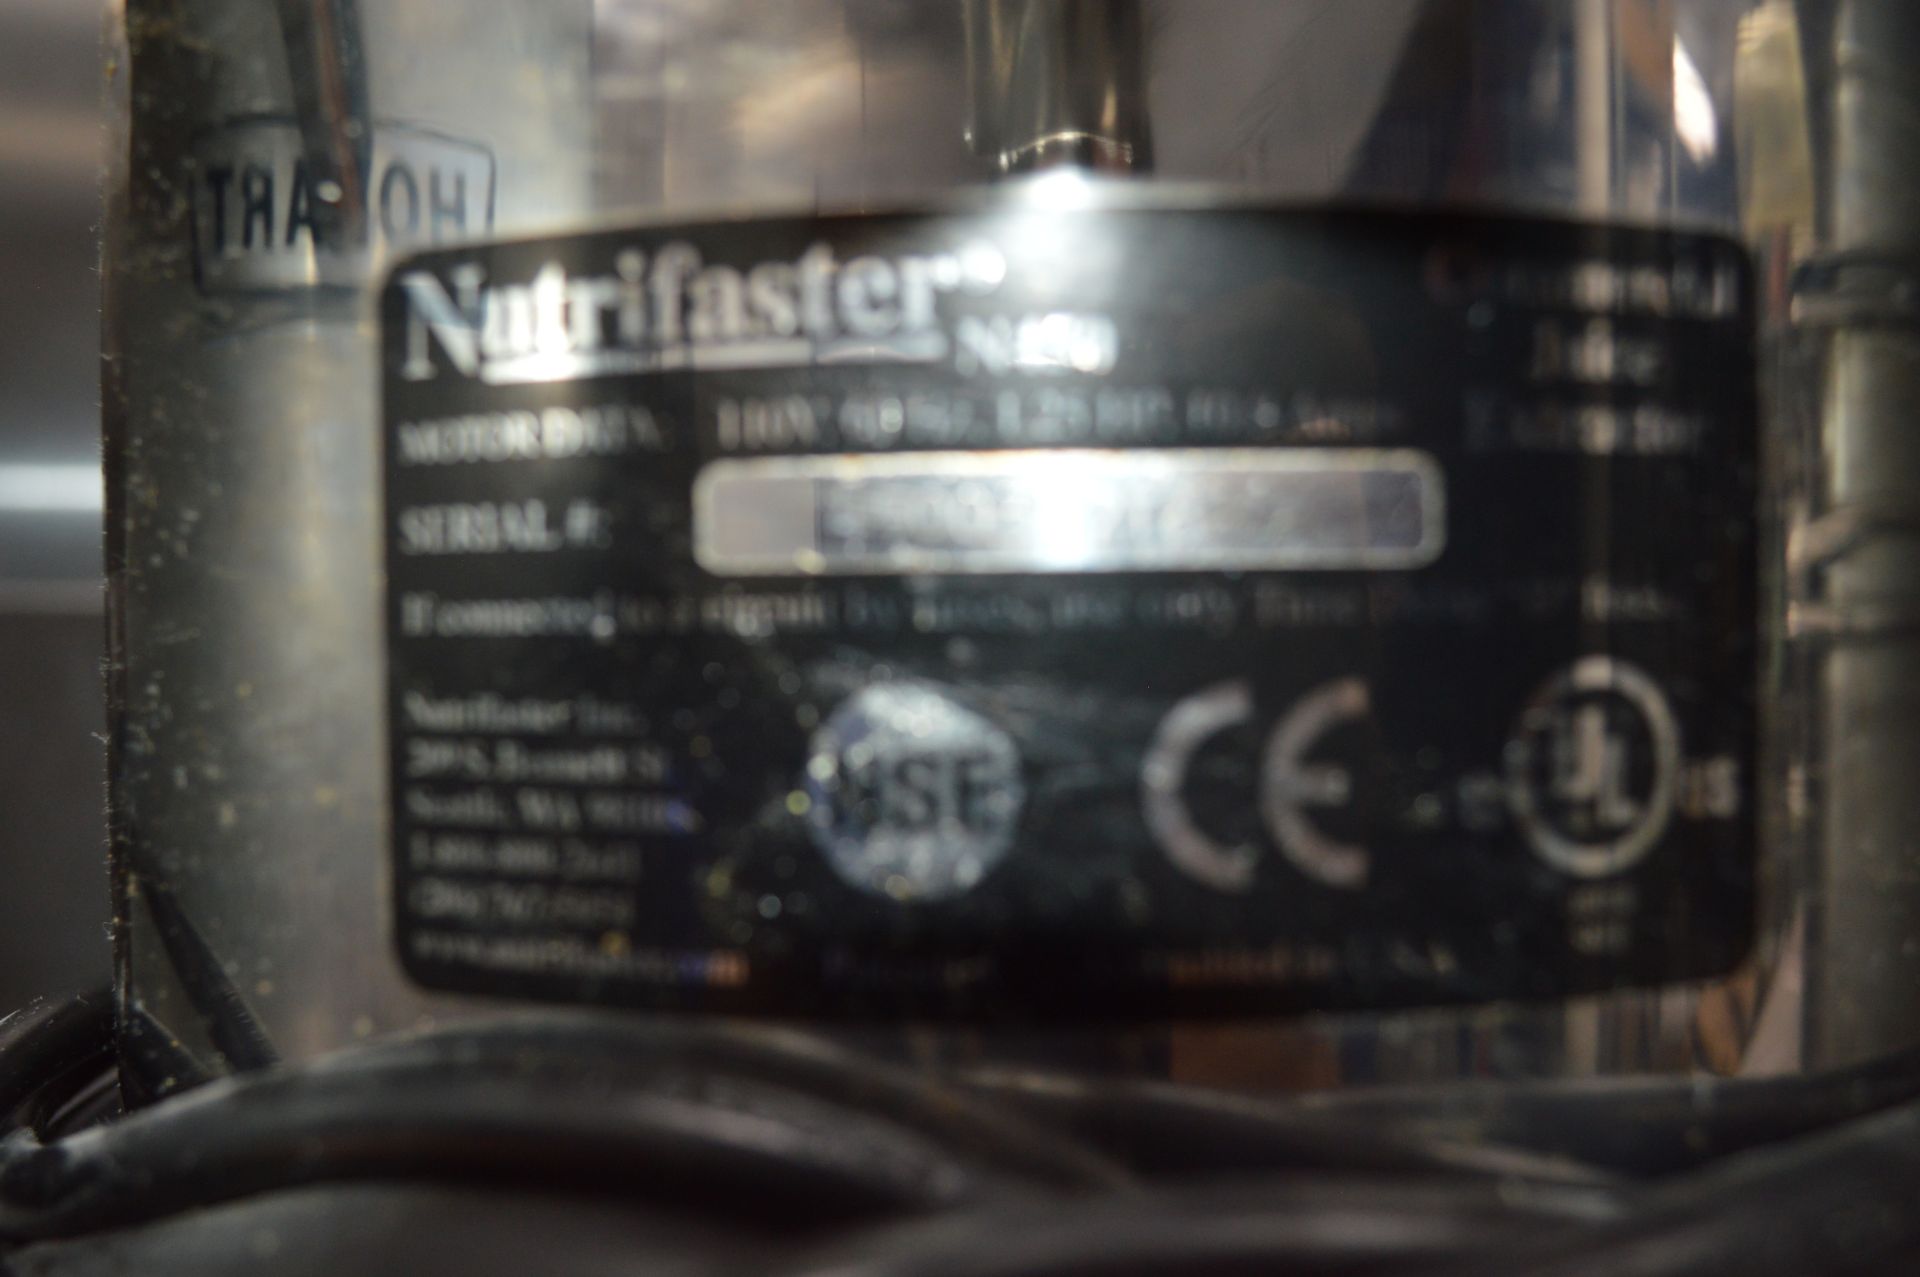 Nutrifaster Juicing Machine - Image 4 of 5